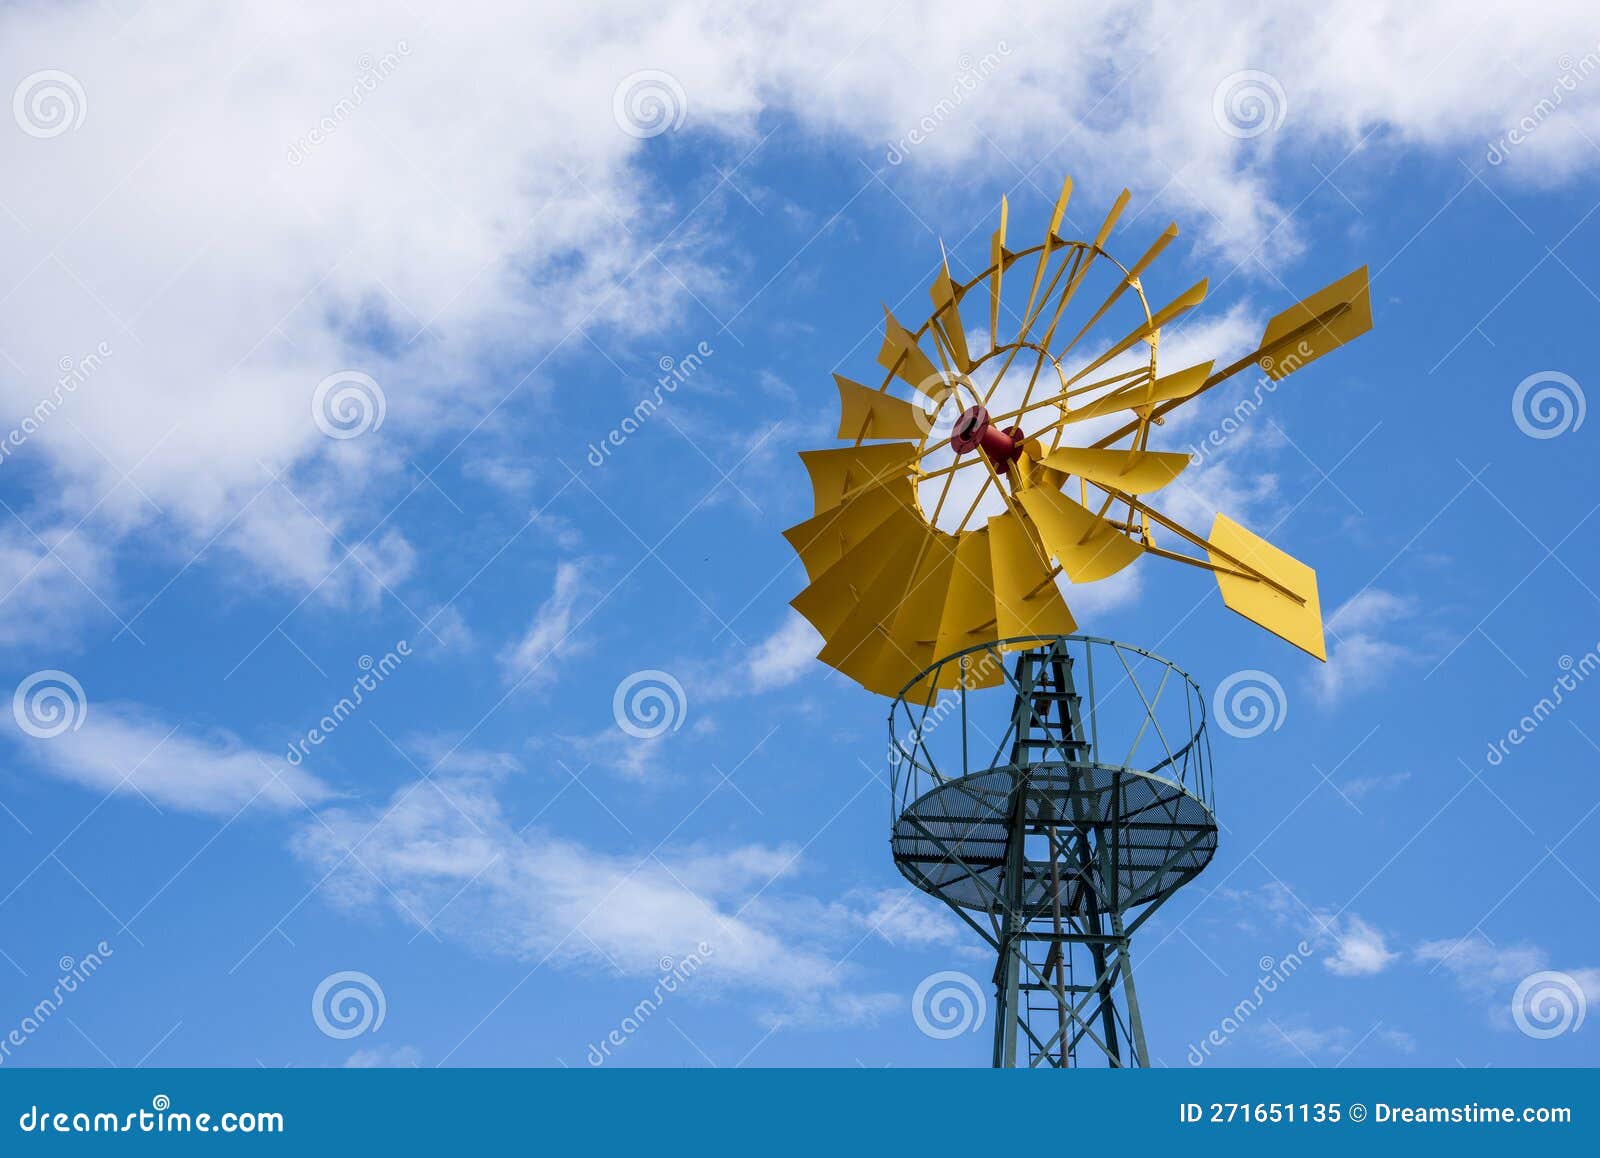 wind turbine, with the yellow blades producing energy